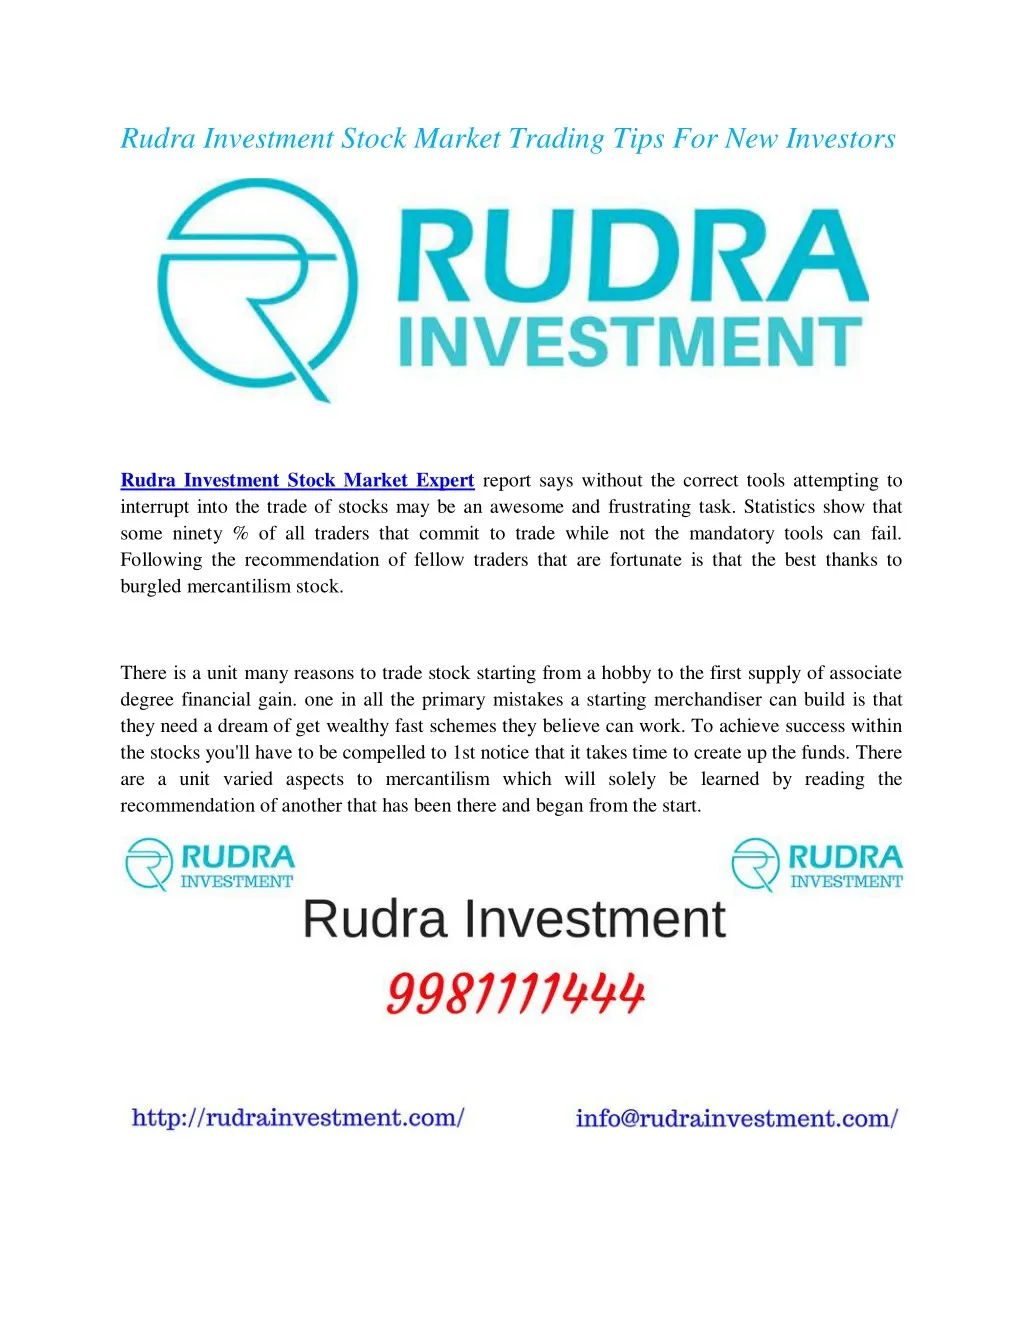 rudra investment stock market trading tips